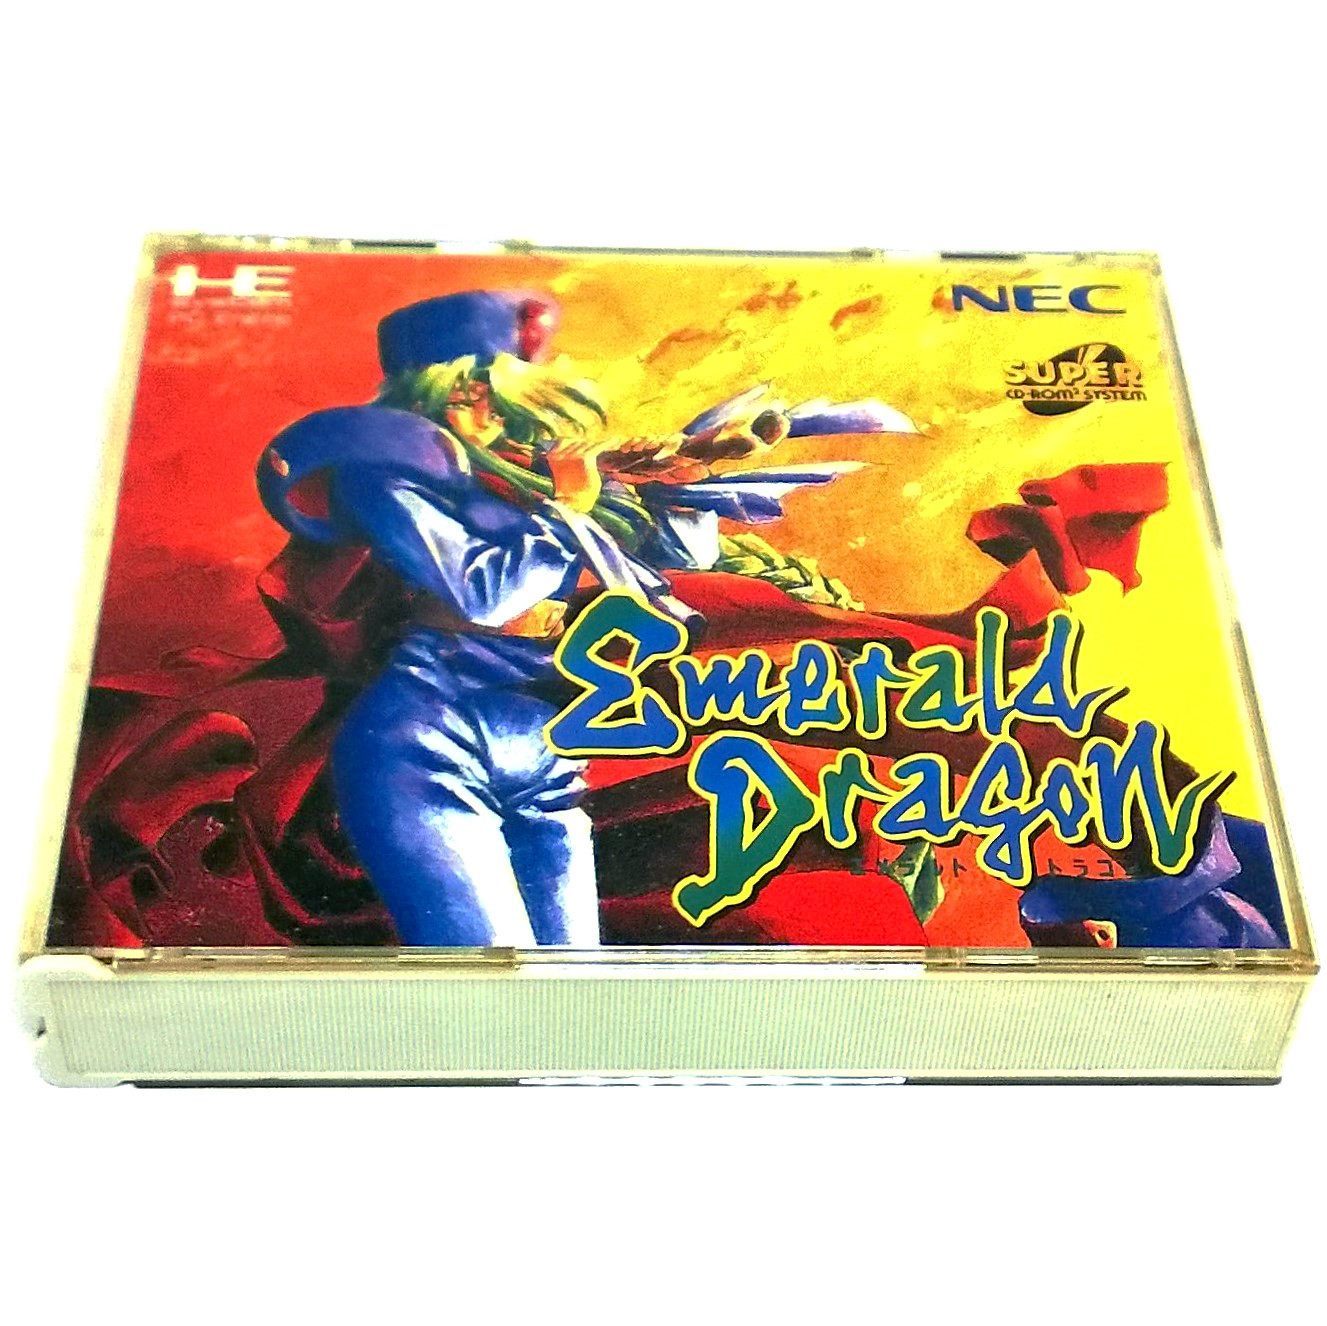 Emerald Dragon for PC Engine - Front of case